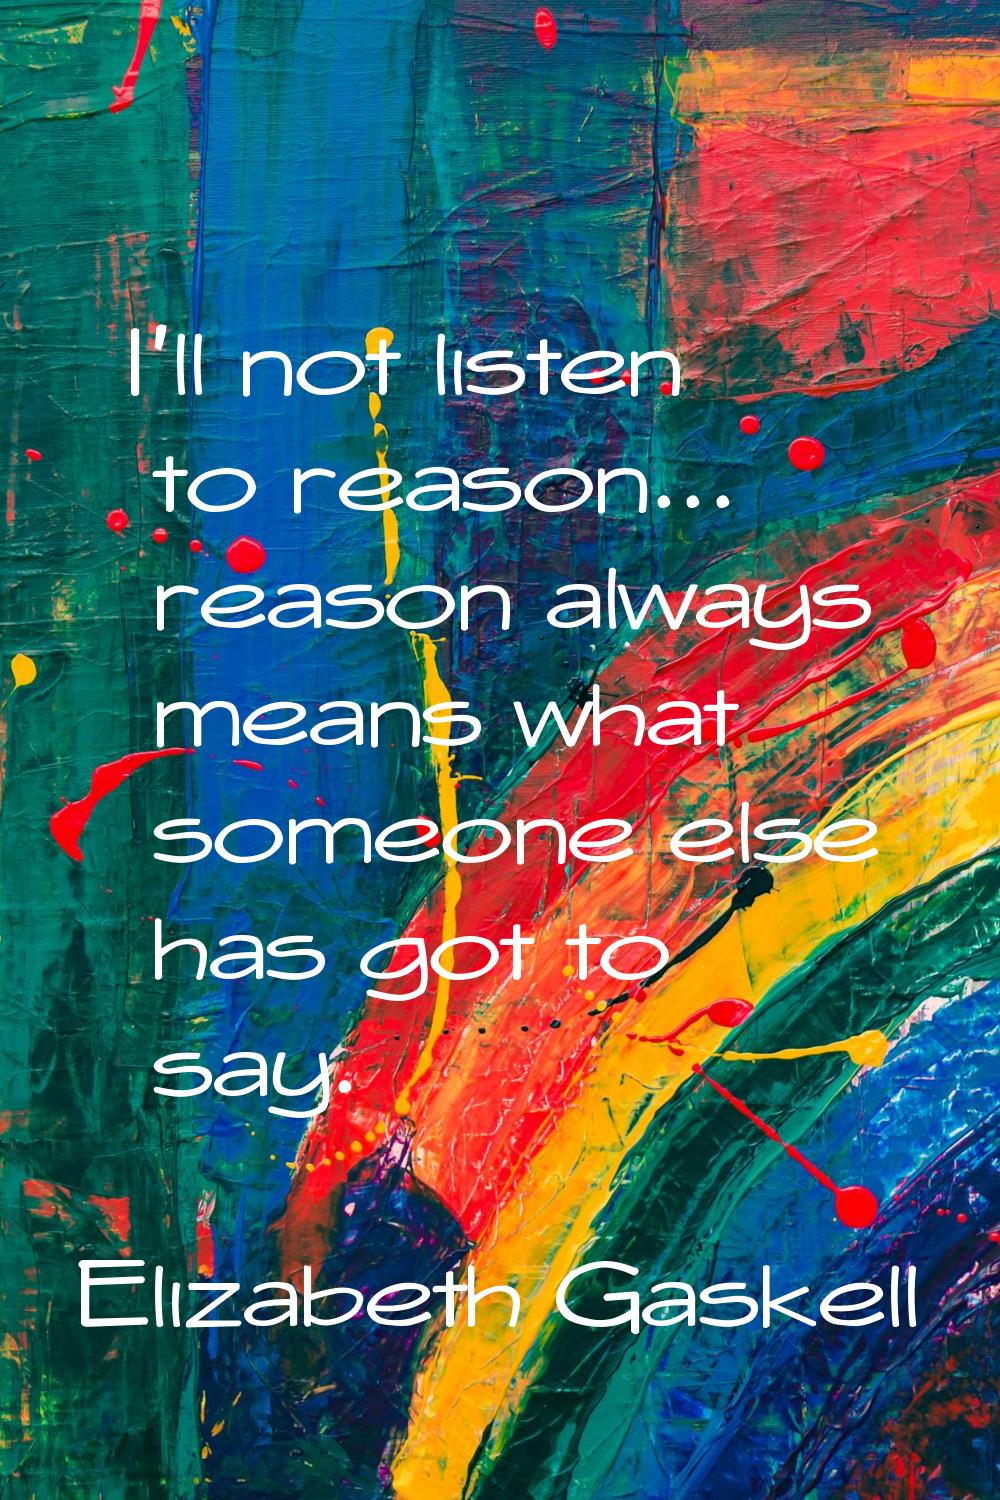 I'll not listen to reason... reason always means what someone else has got to say.